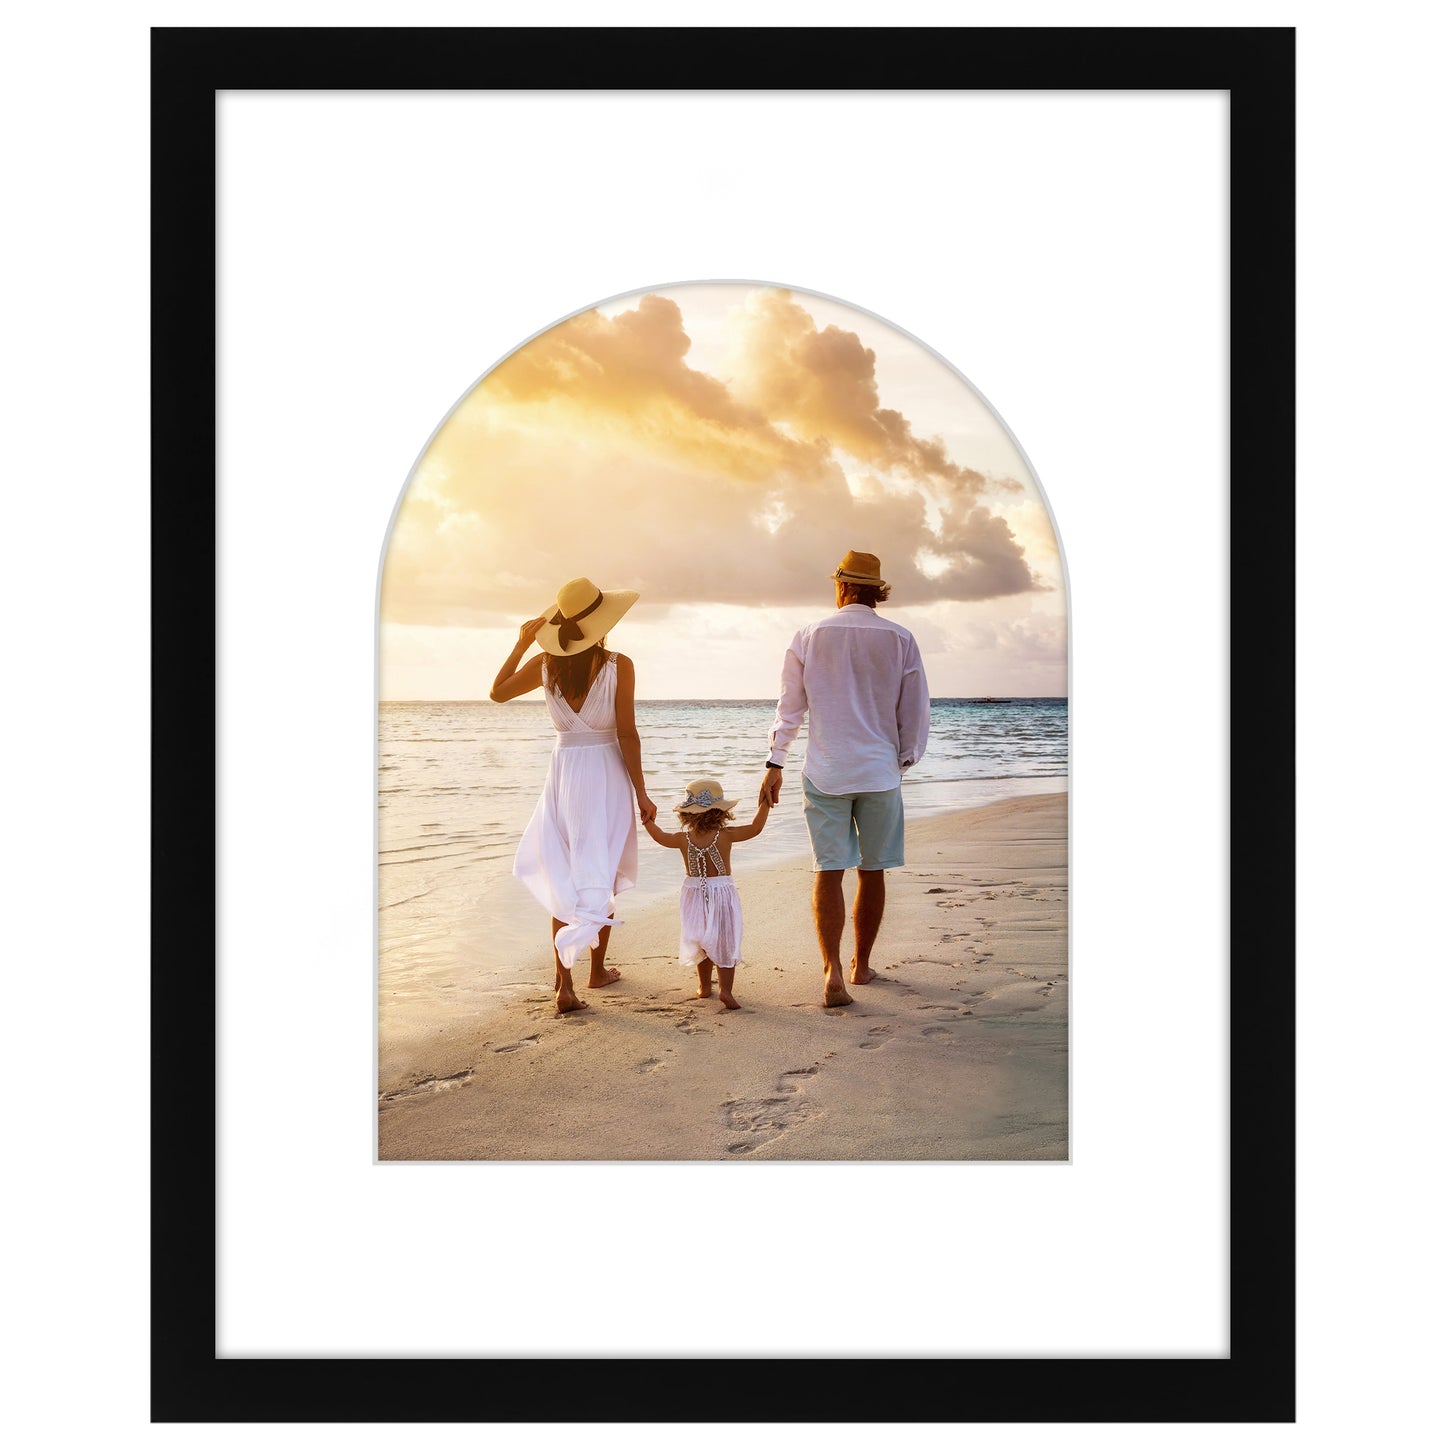 11x14 Arch Mat Picture Frame |  16x20 Frame Without Mat